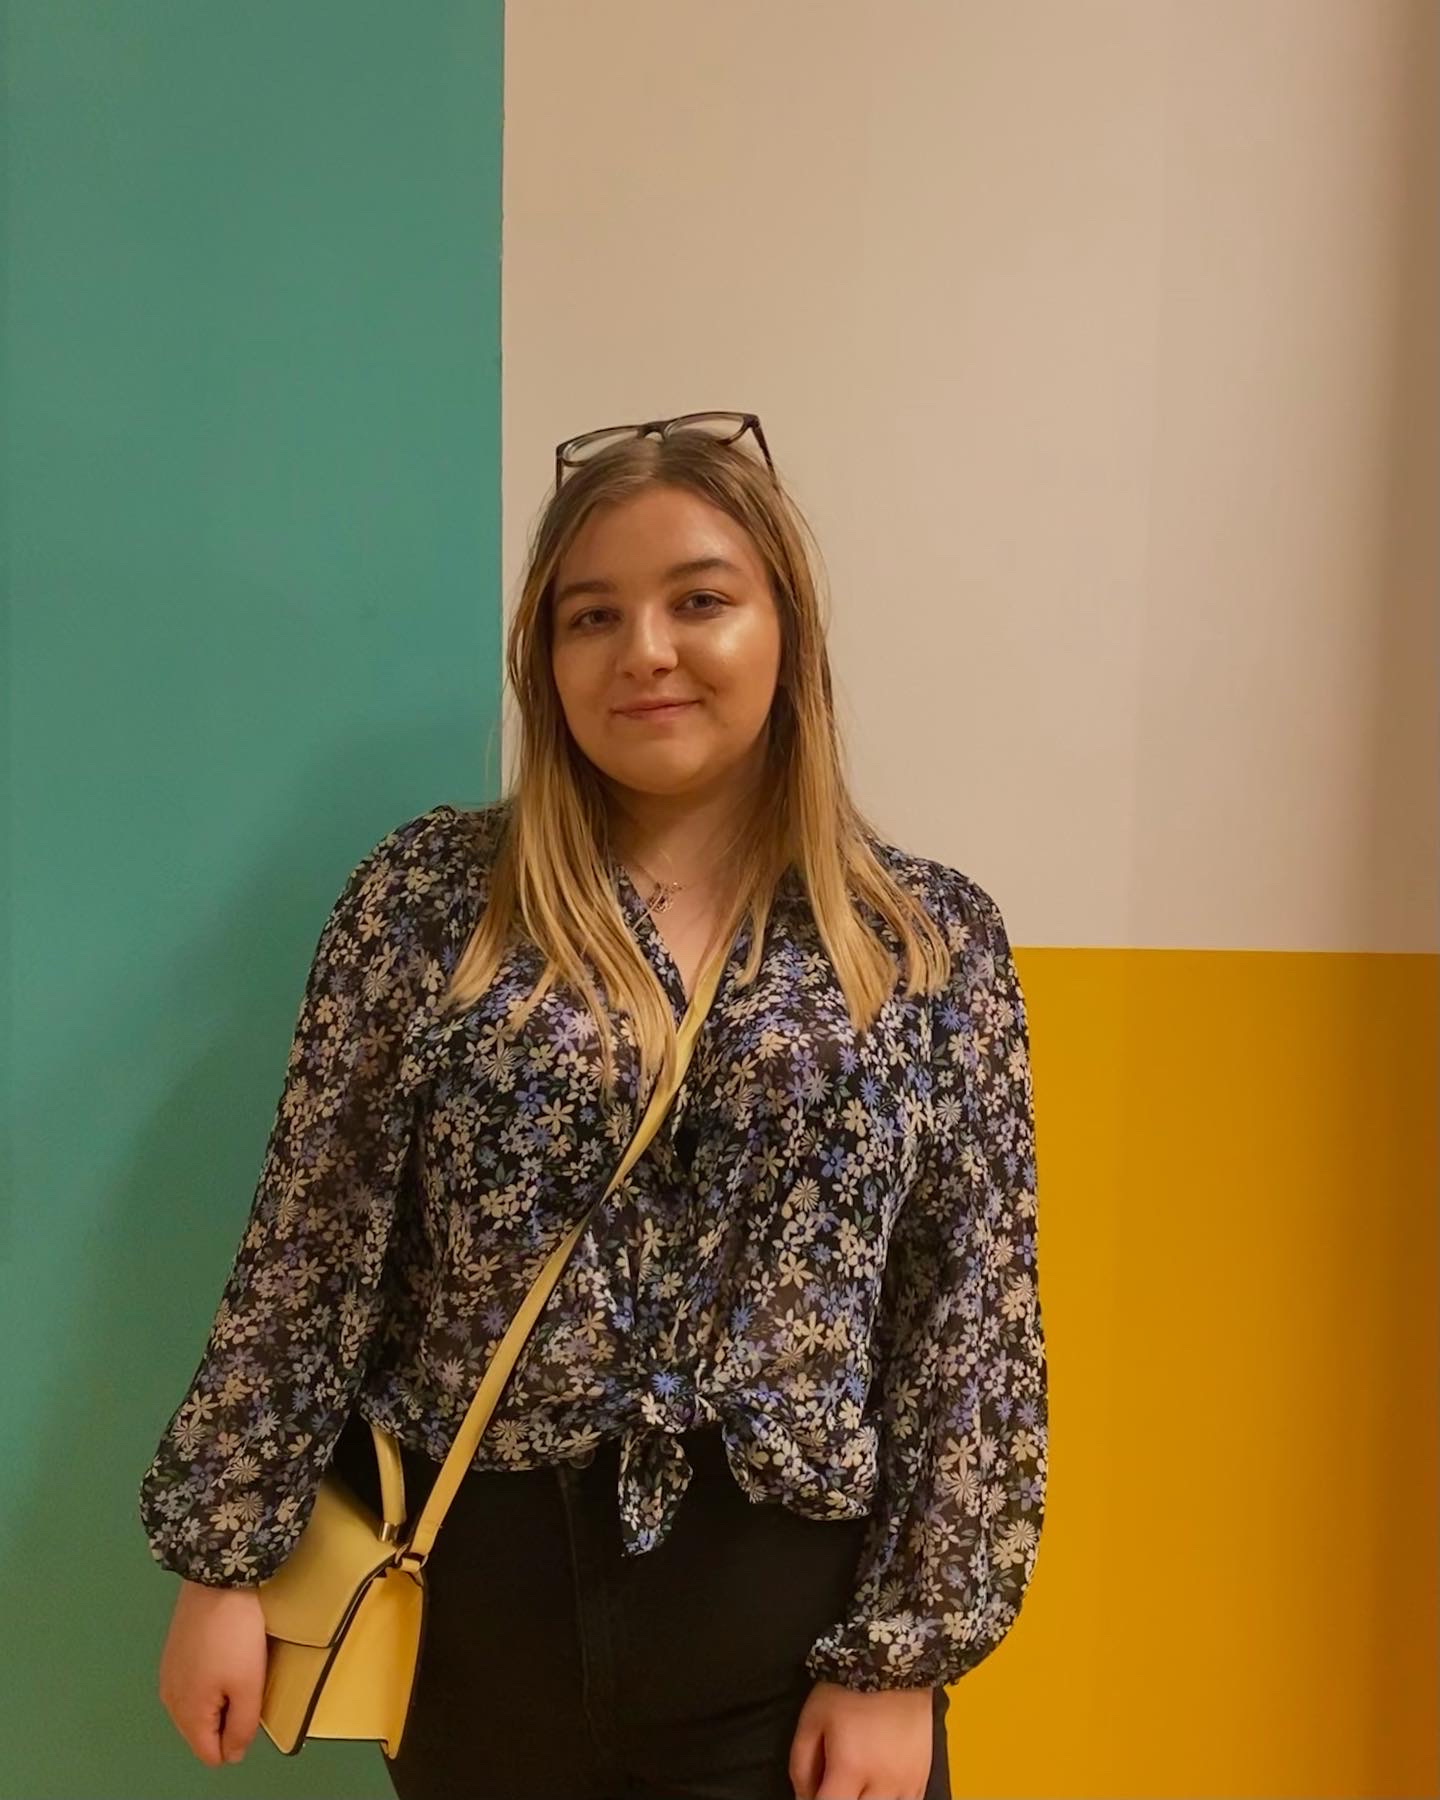 A student standing against a colourful wall